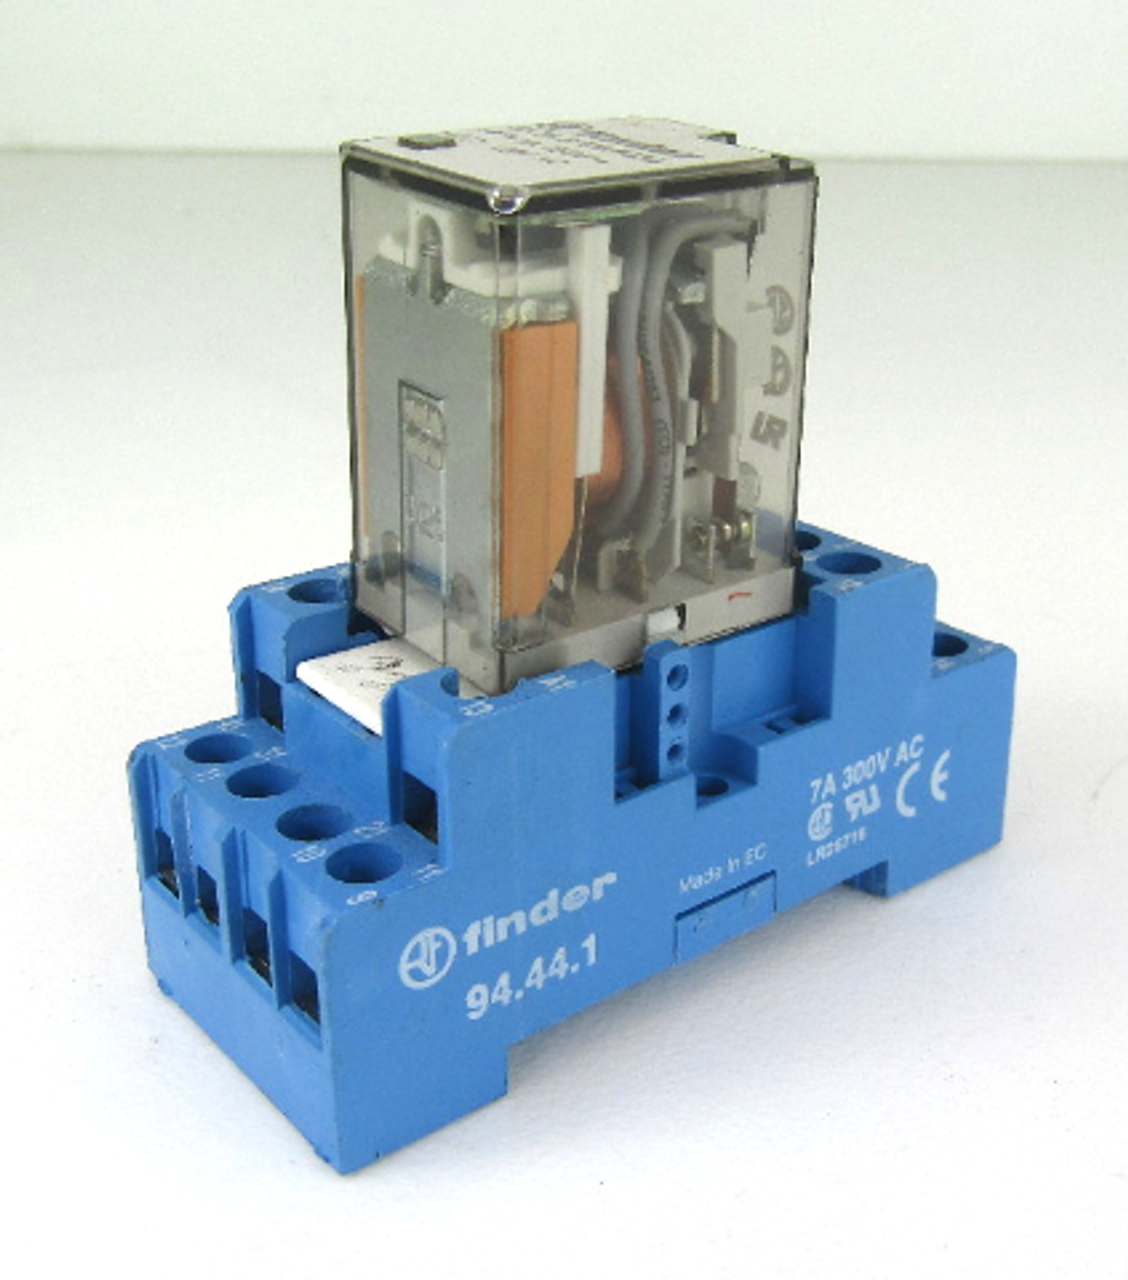 Finder 55.34.8.120.0030 Cube Relay 120VAC, 5A with Base